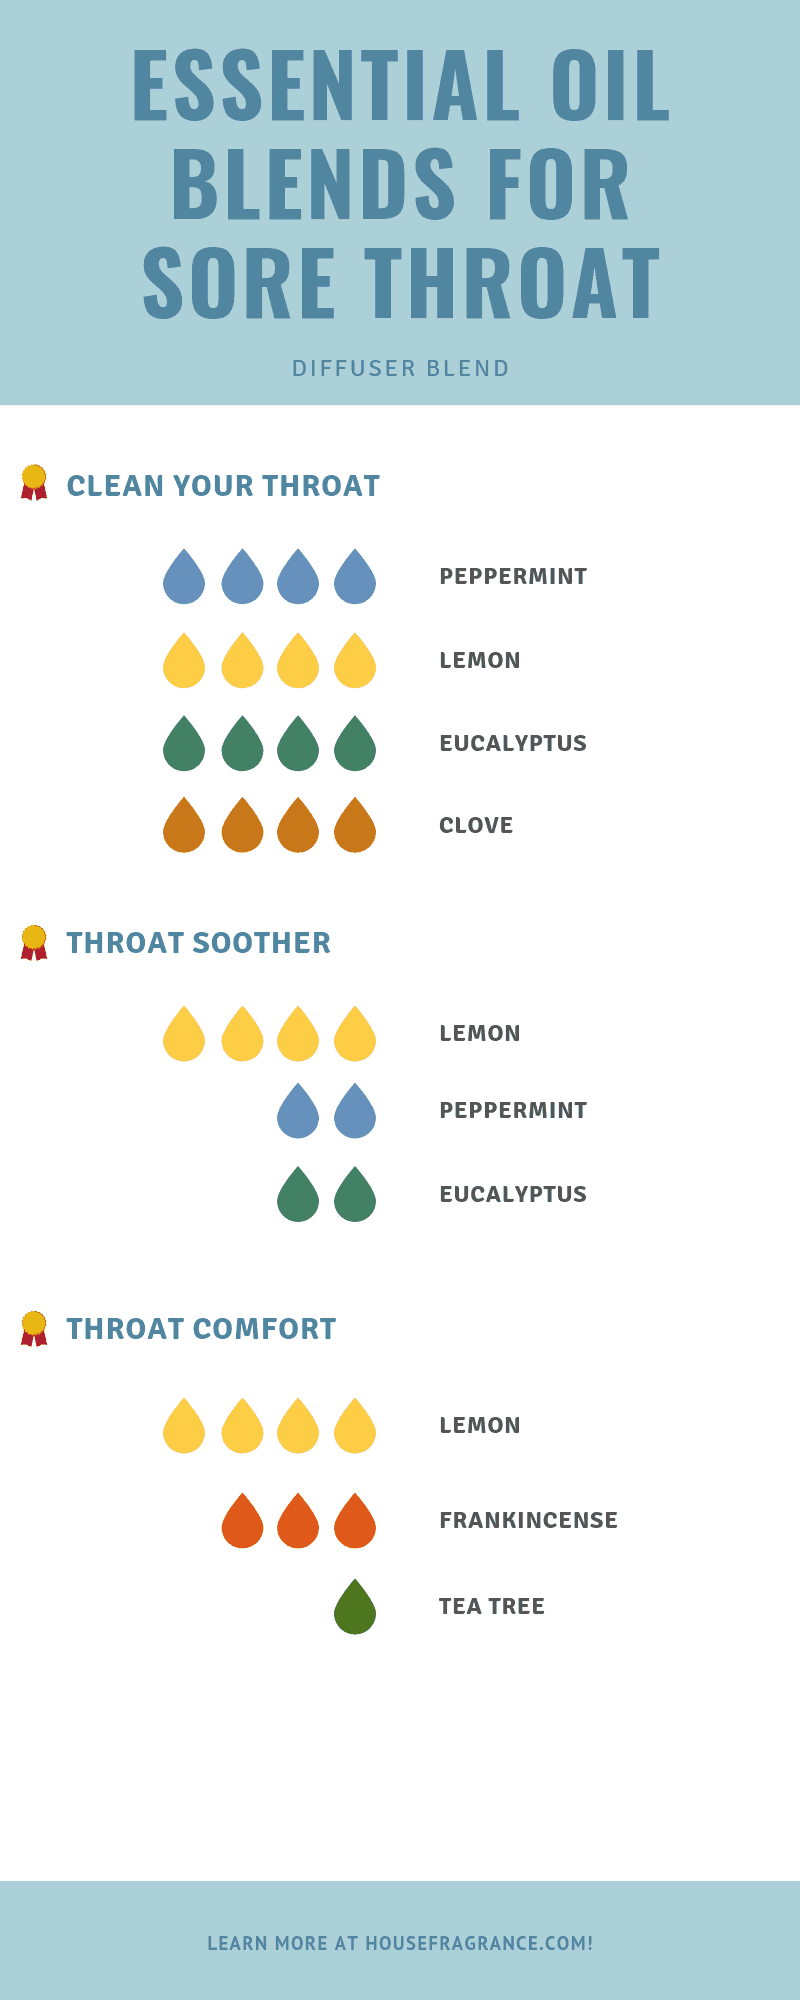 Essential Oil Blends For Sore Throat